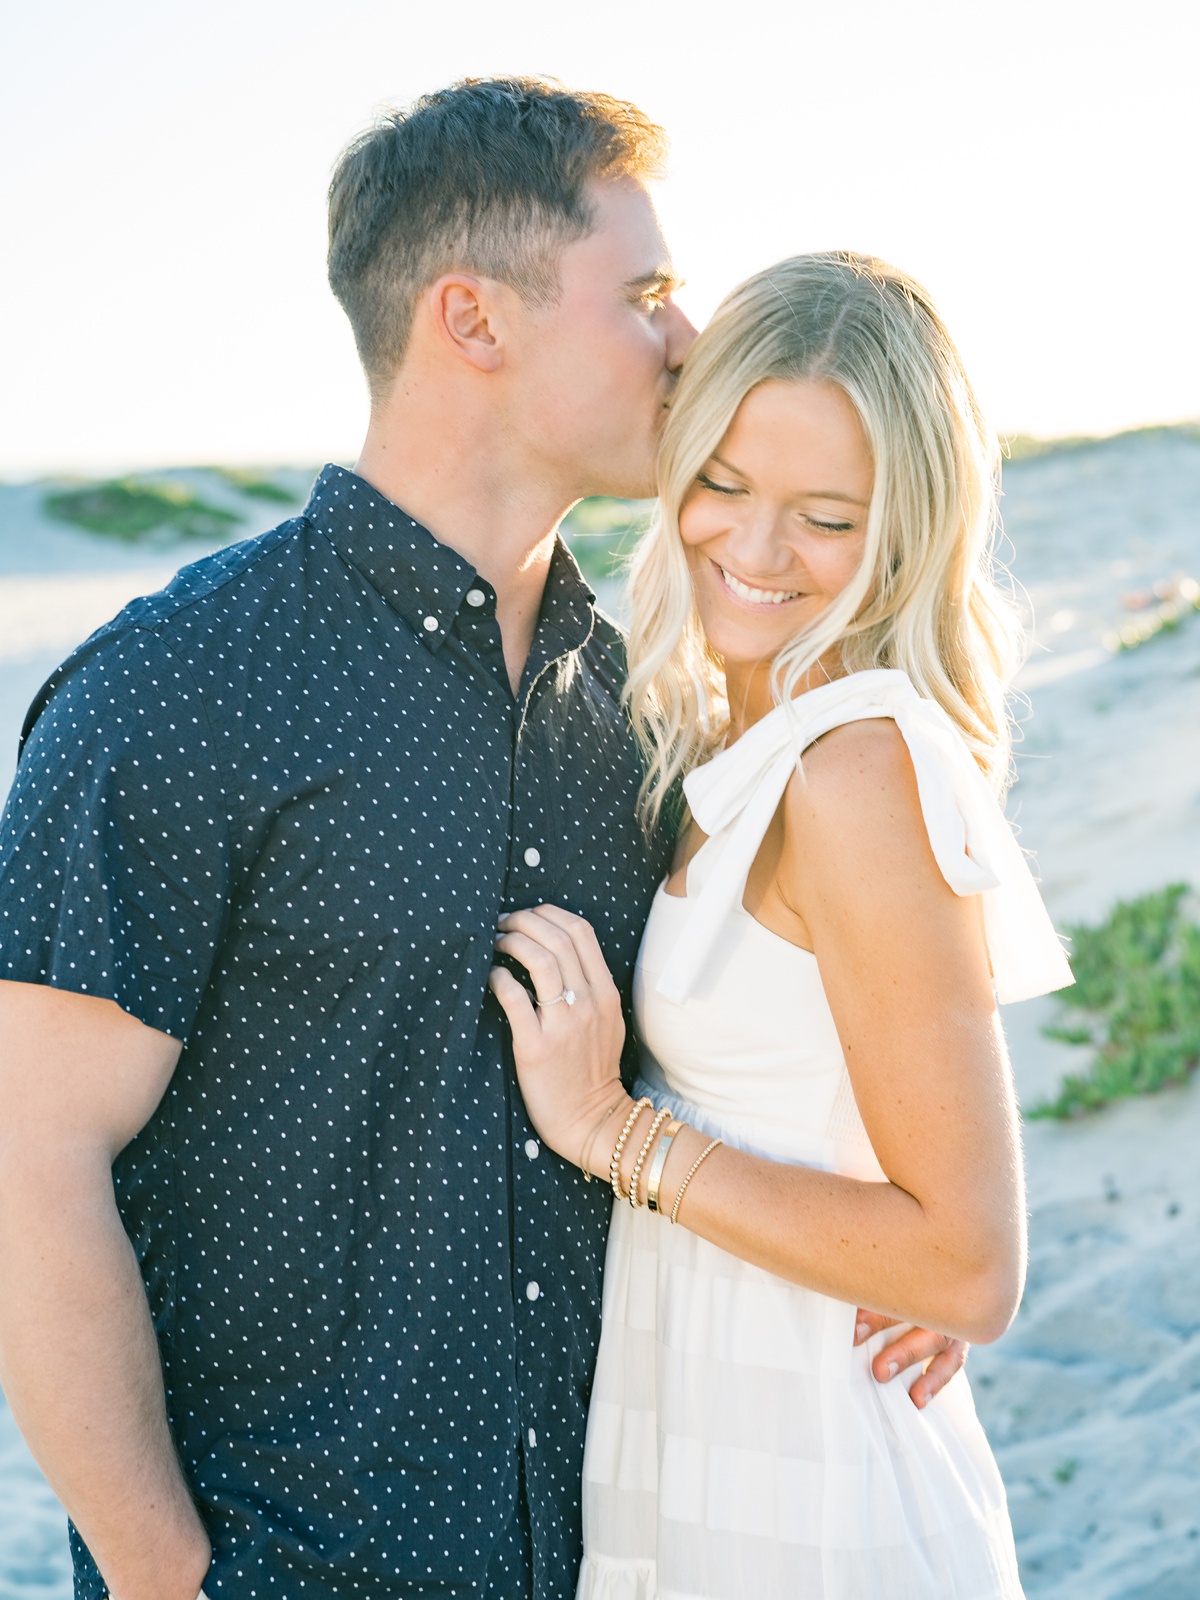 San Diego beach engagement photo session | Shot by light and airy San Diego photographer, Mandy Ford